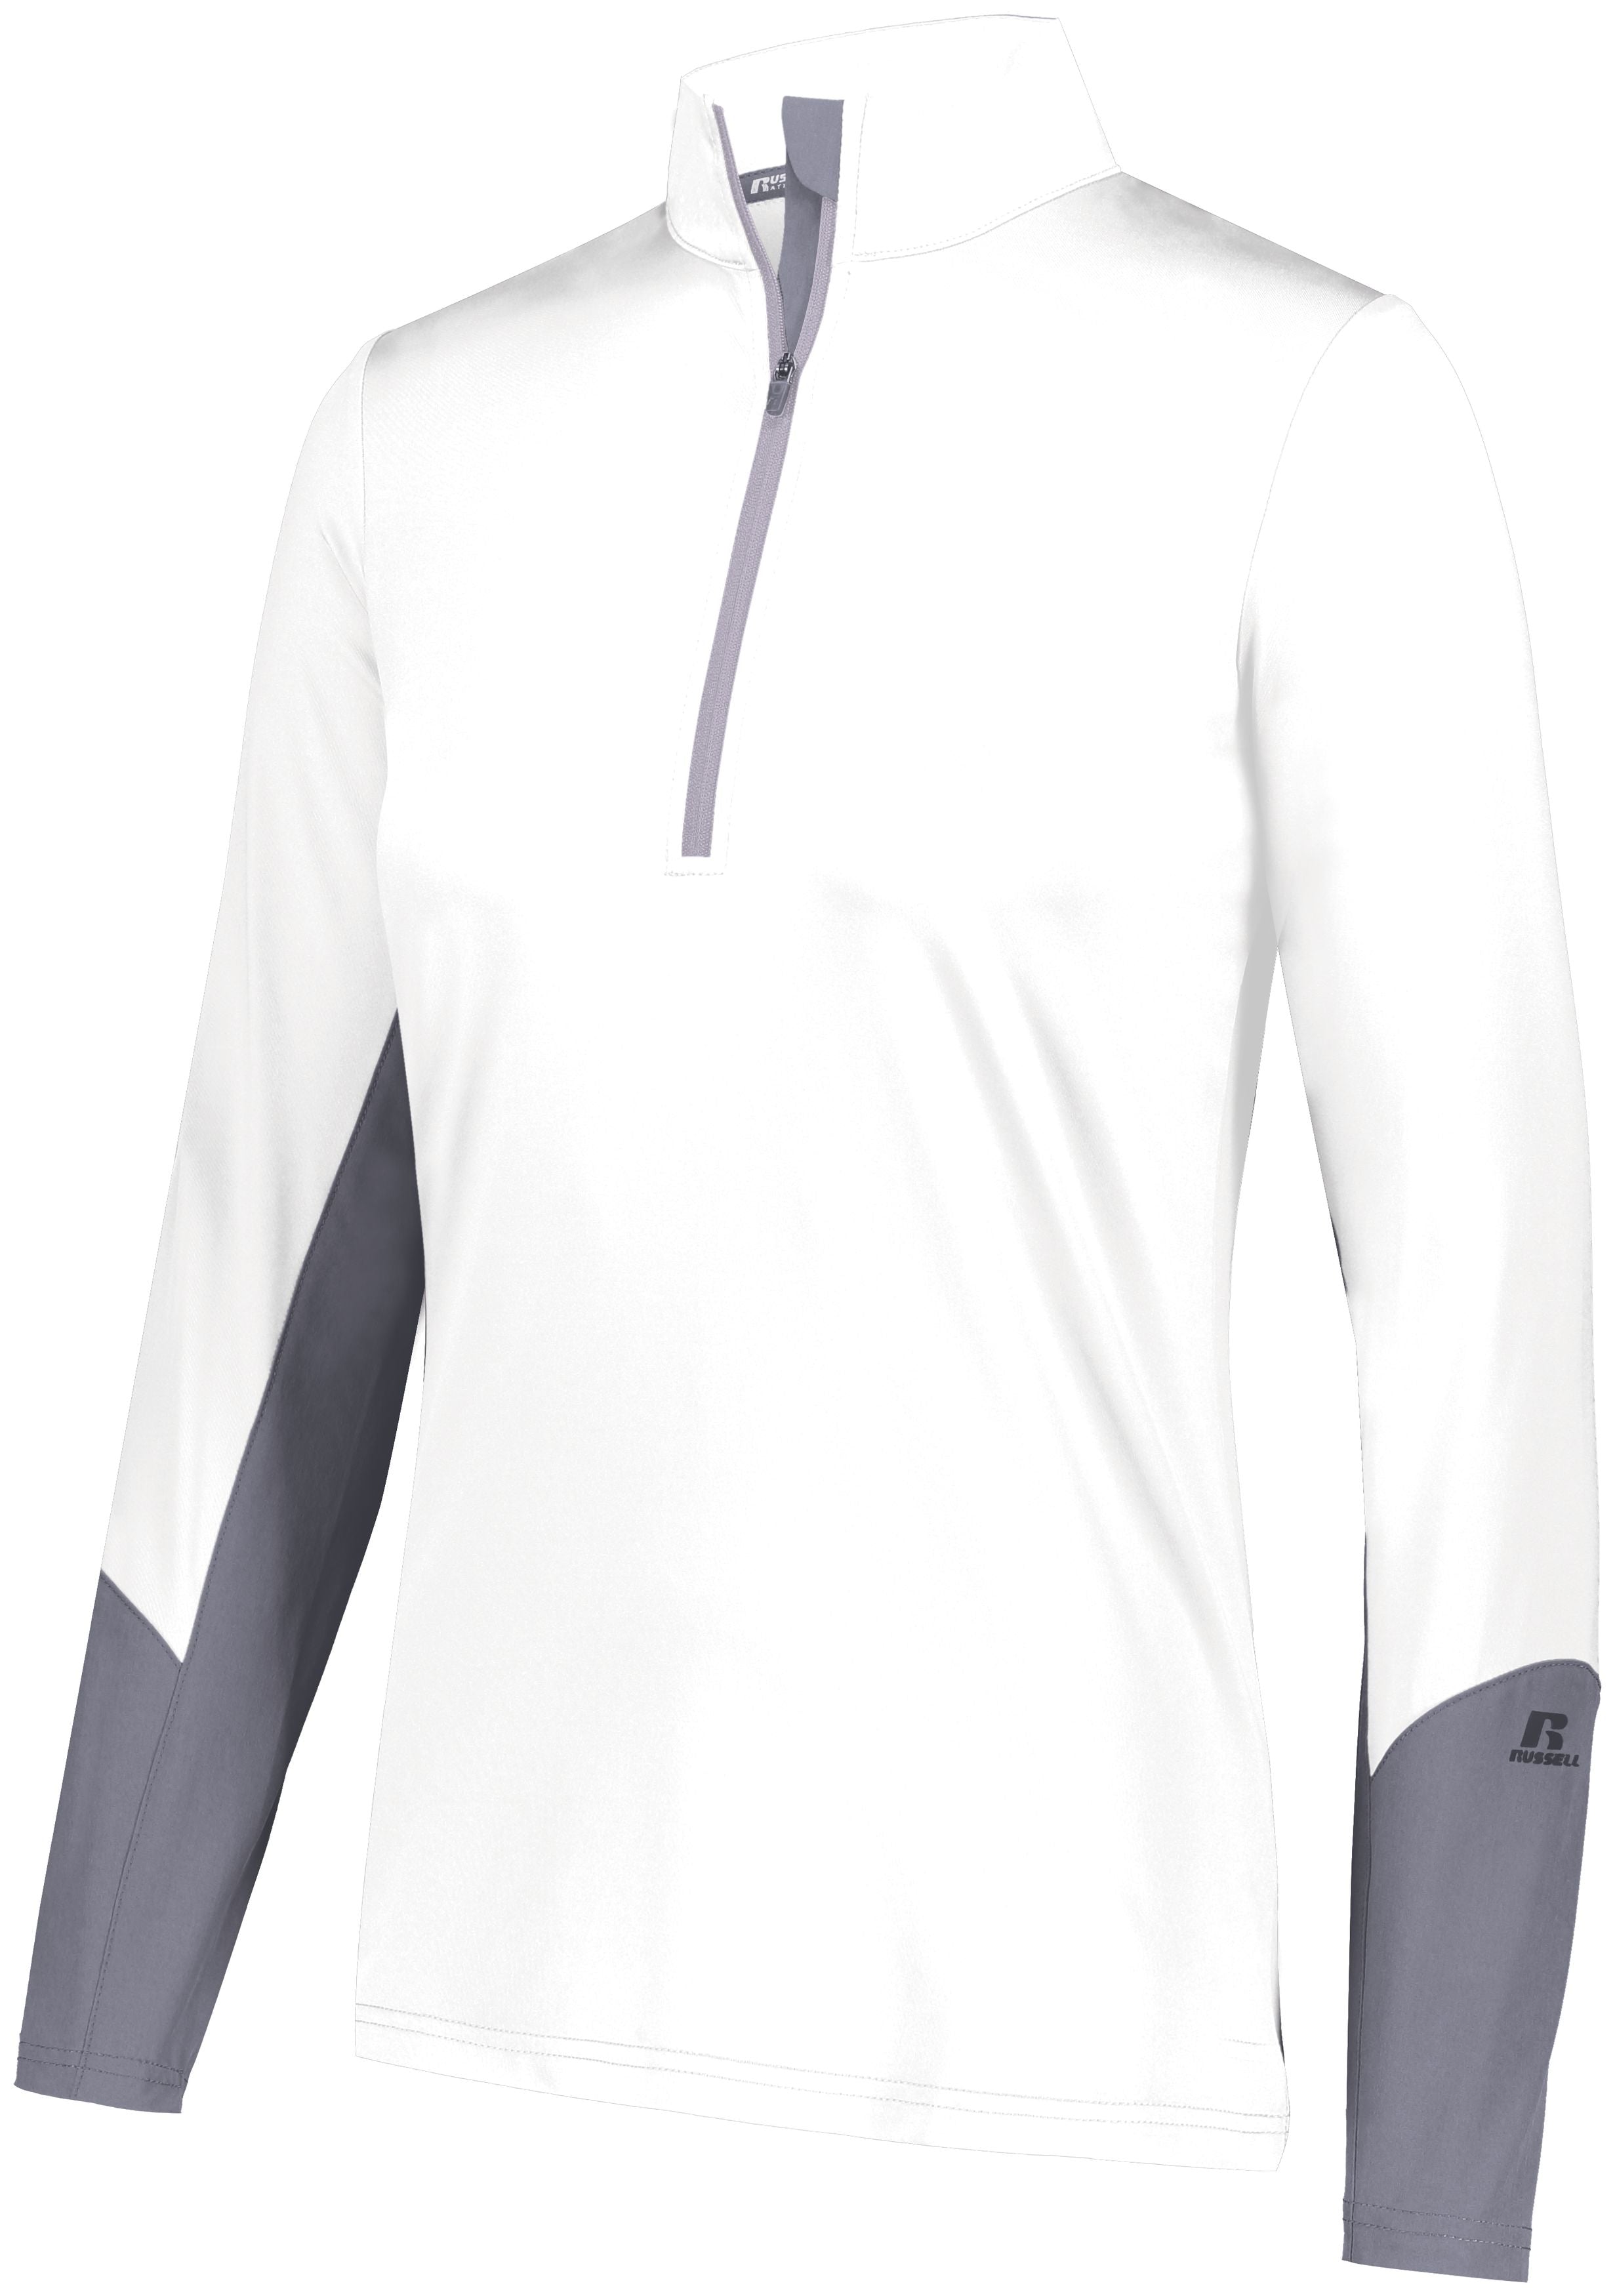 Russell Athletic Ladies Hybrid Pullover in White/Steel  -Part of the Ladies, Russell-Athletic-Products, Shirts product lines at KanaleyCreations.com